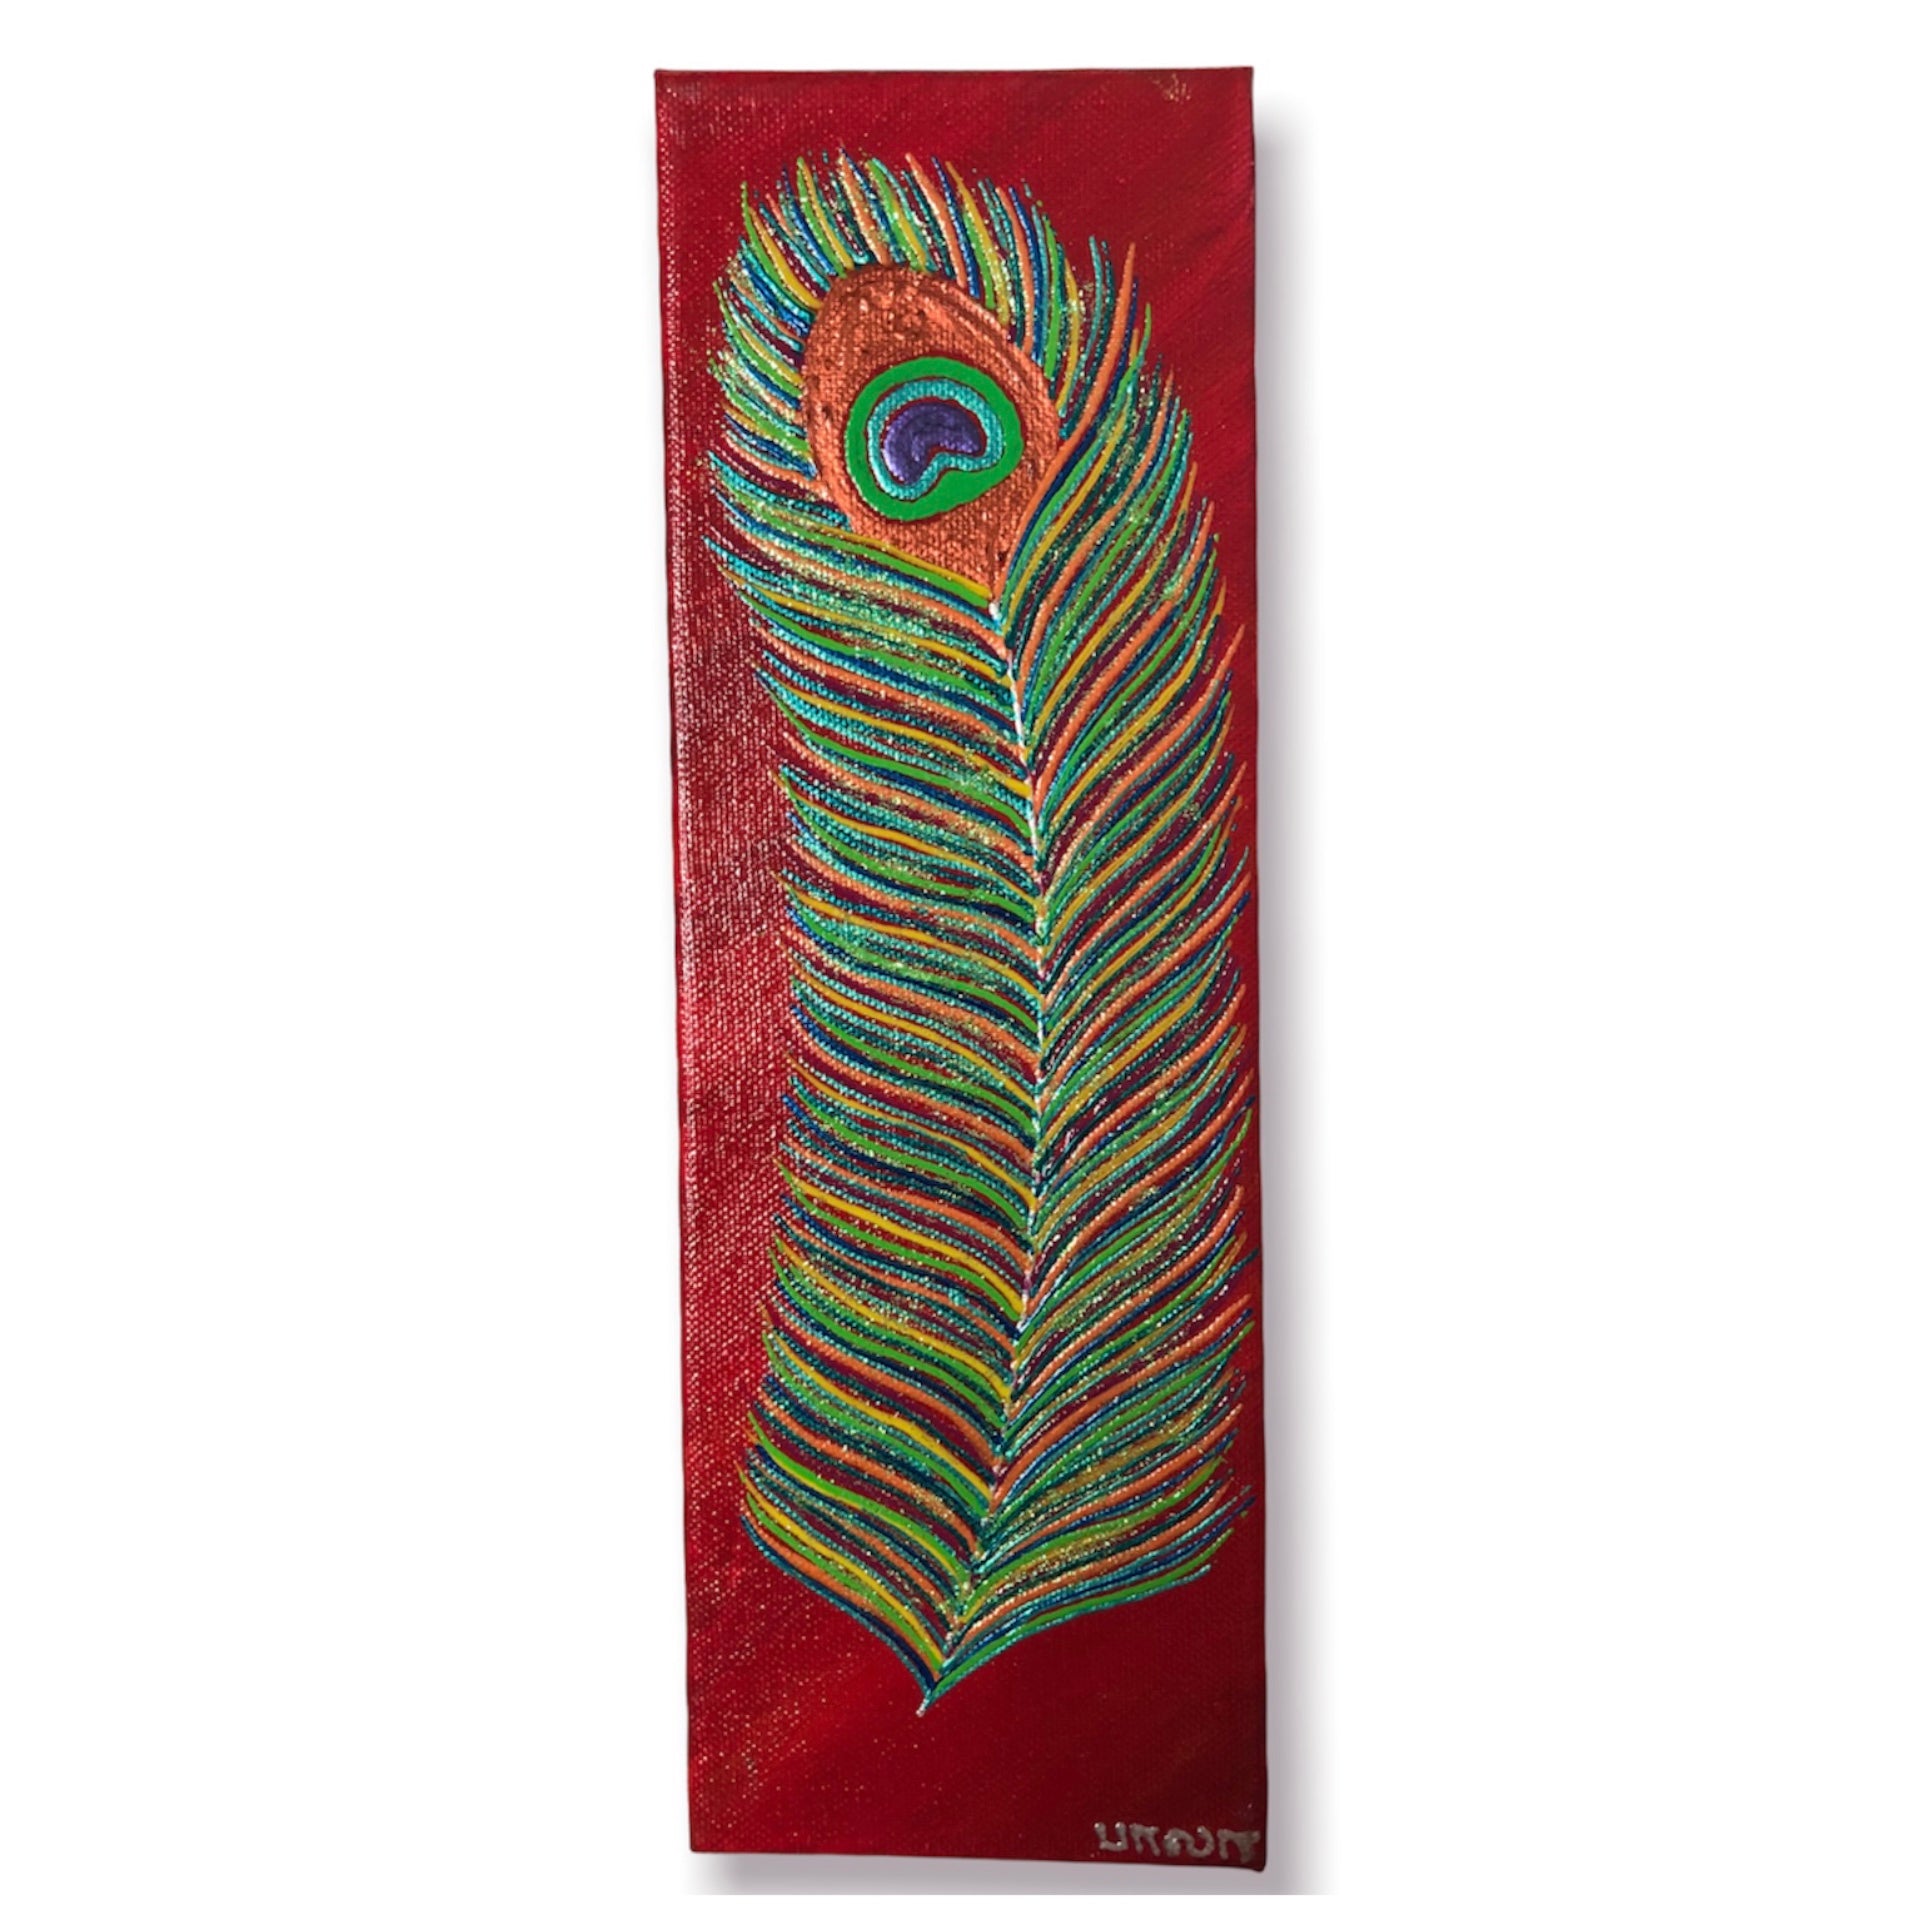 Value Arts Inc. Peacock Feather Scarf